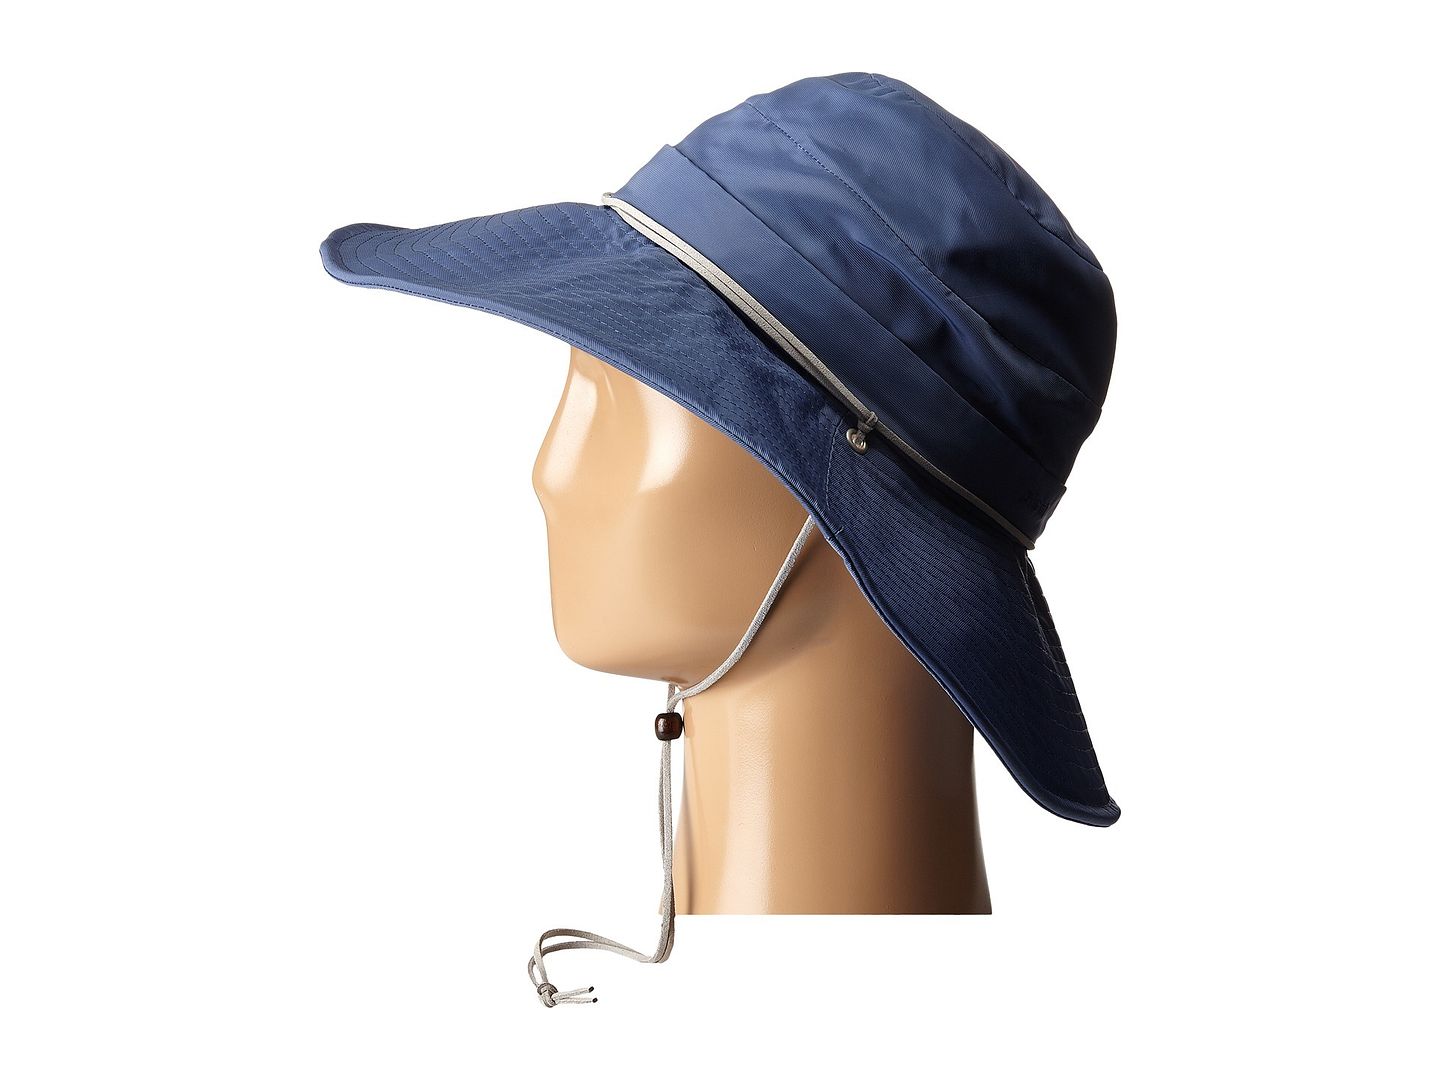 This Mina hat from Pistil is ideal for summer activities other than sitting by the pool. | Zappos